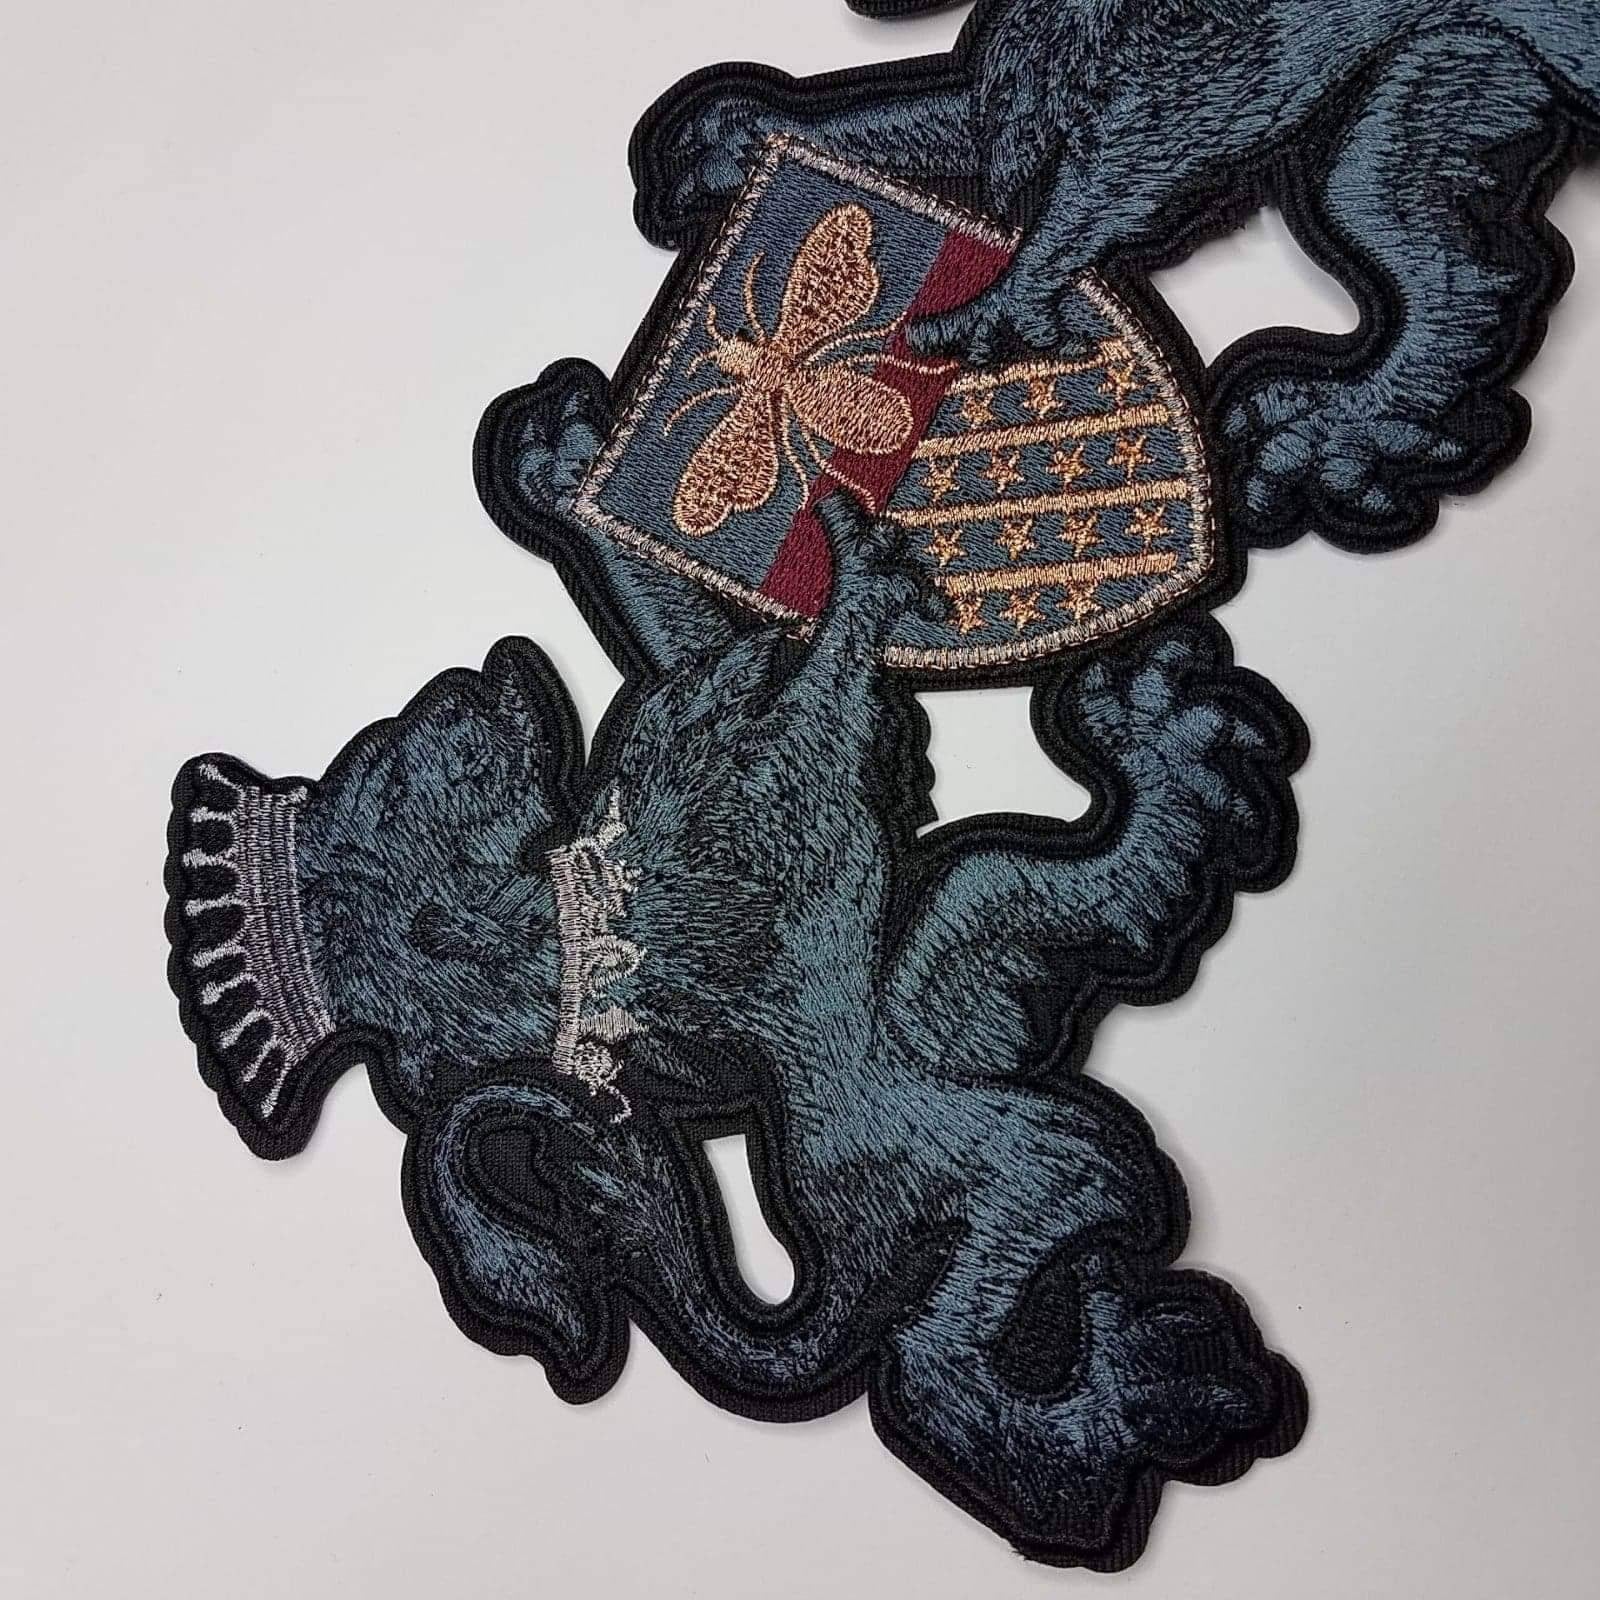 Exclusive, Royal Lions with Regal Crest & Crowns with Golden Bee, Iron On Embroidery Patch, Cool Patch for Men, Fashion Patch, 9"×6.5"